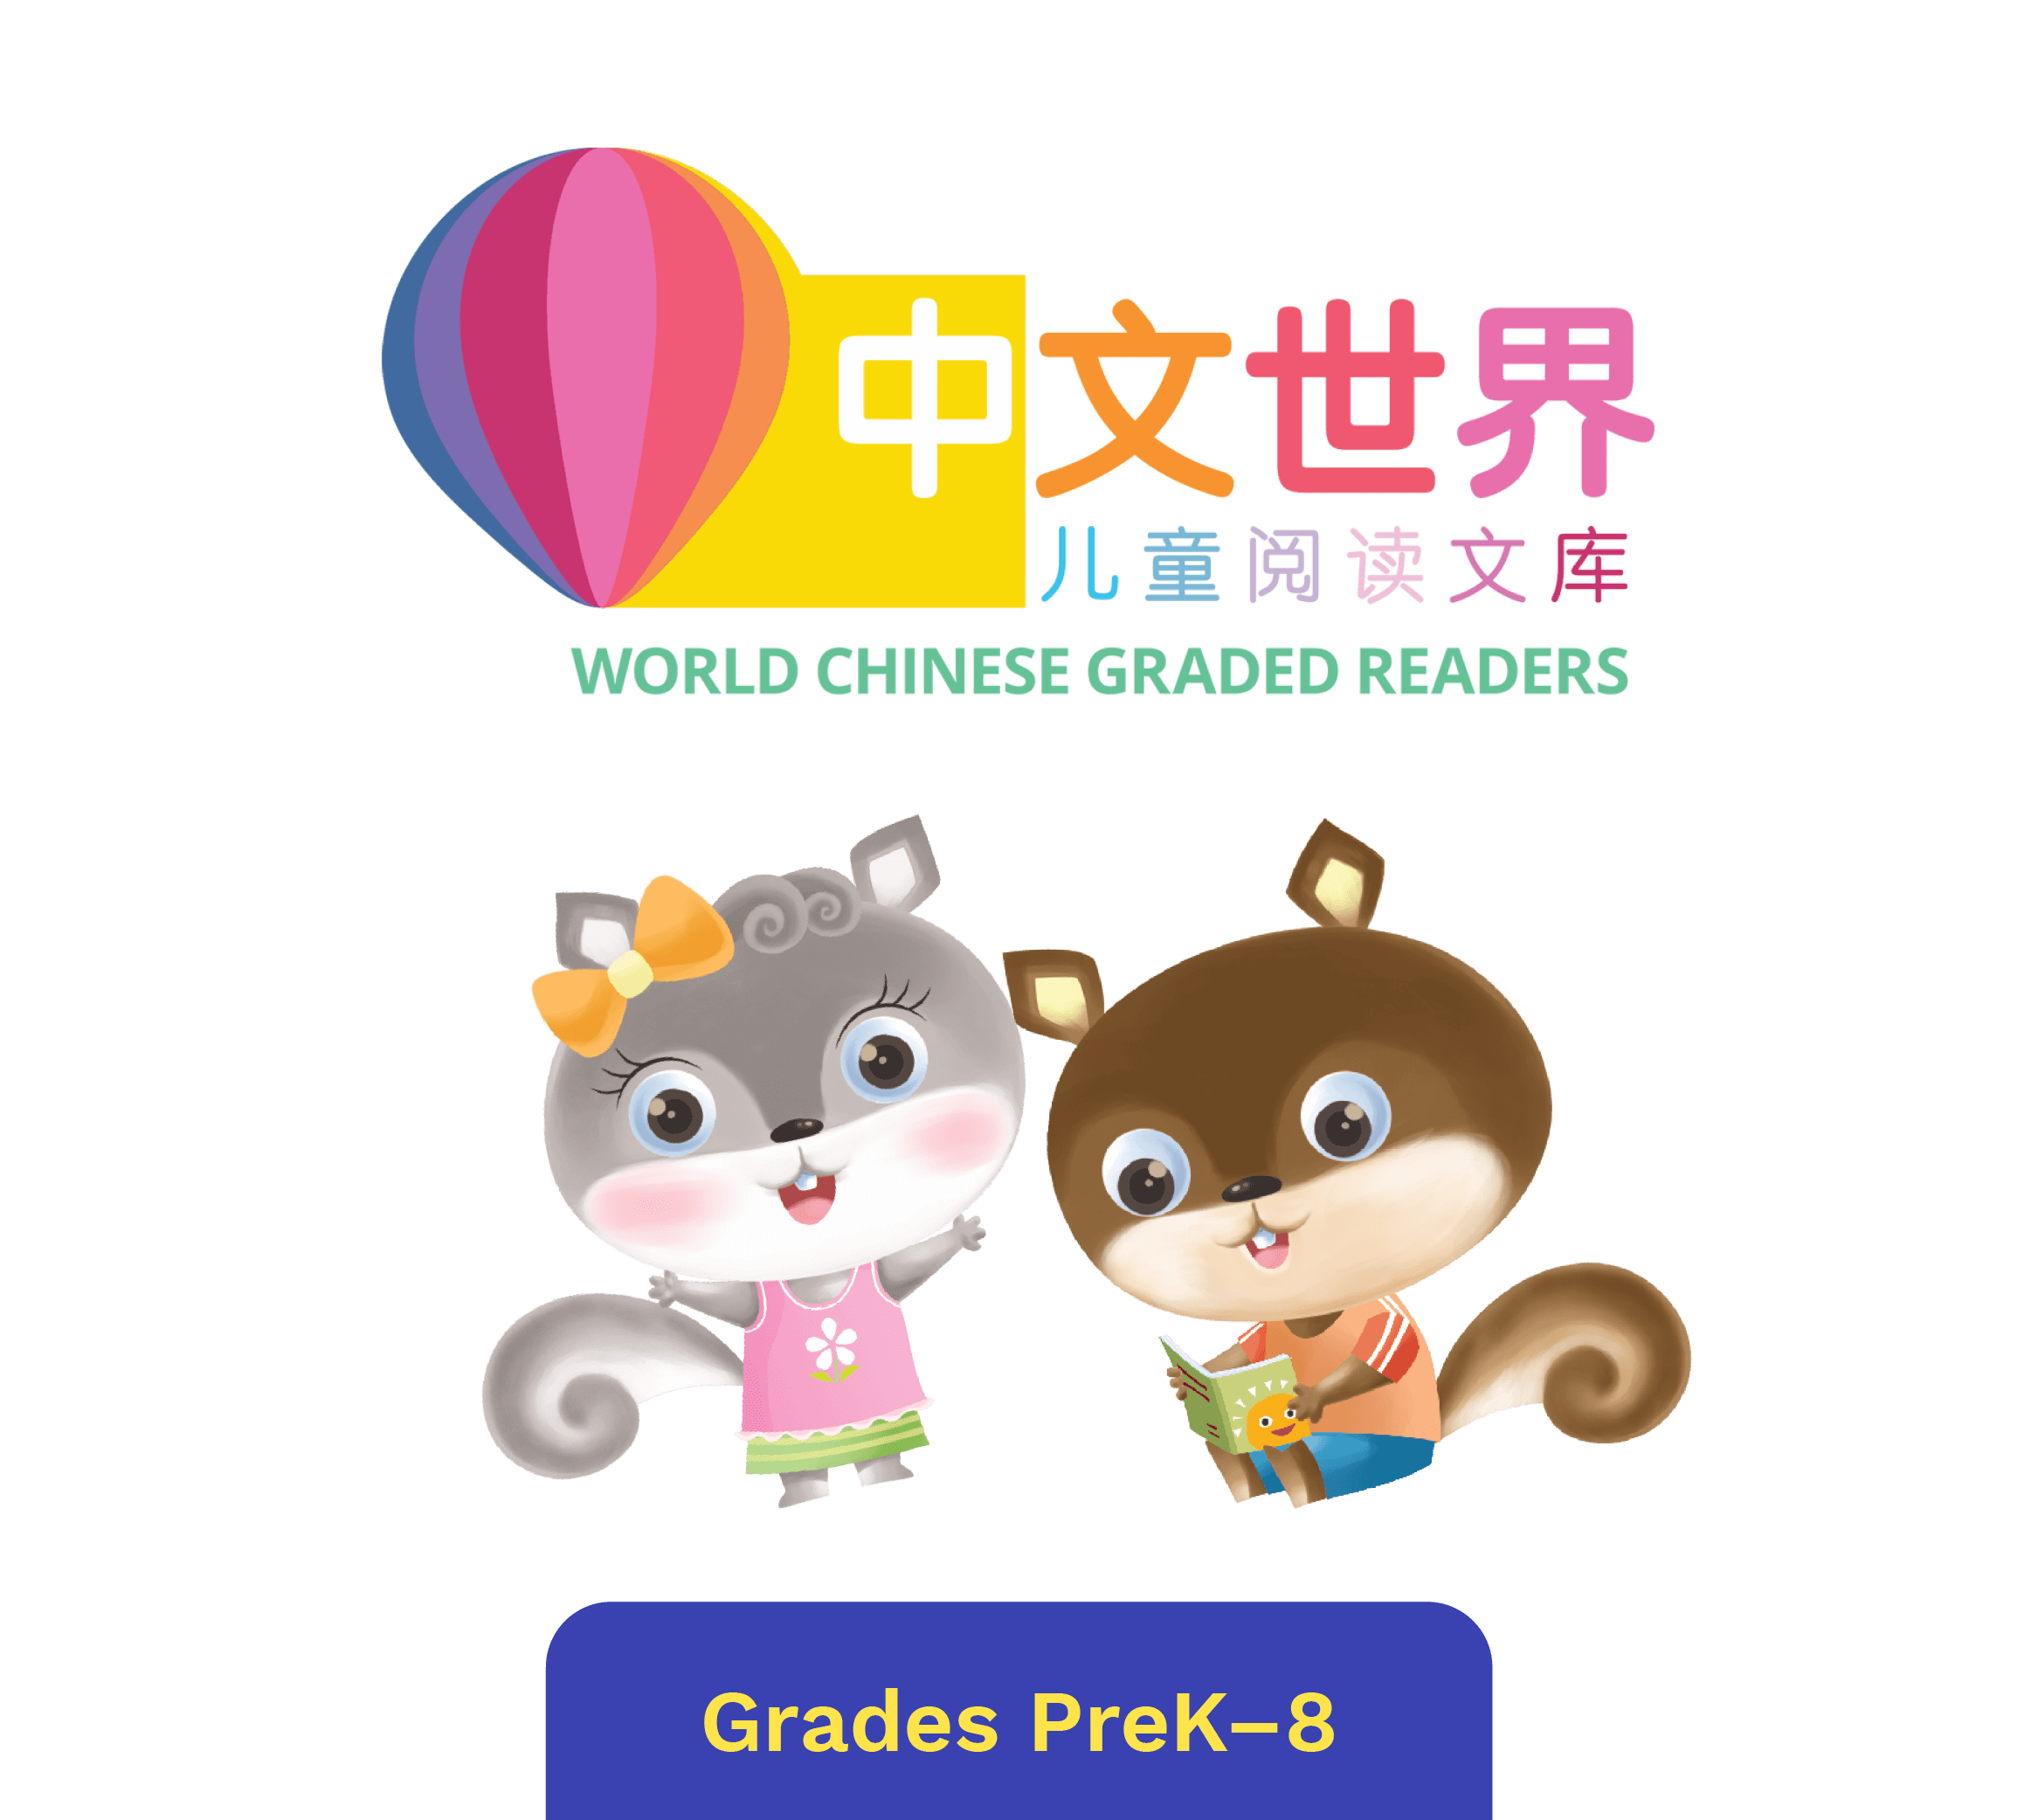 World Chinese Graded Readers